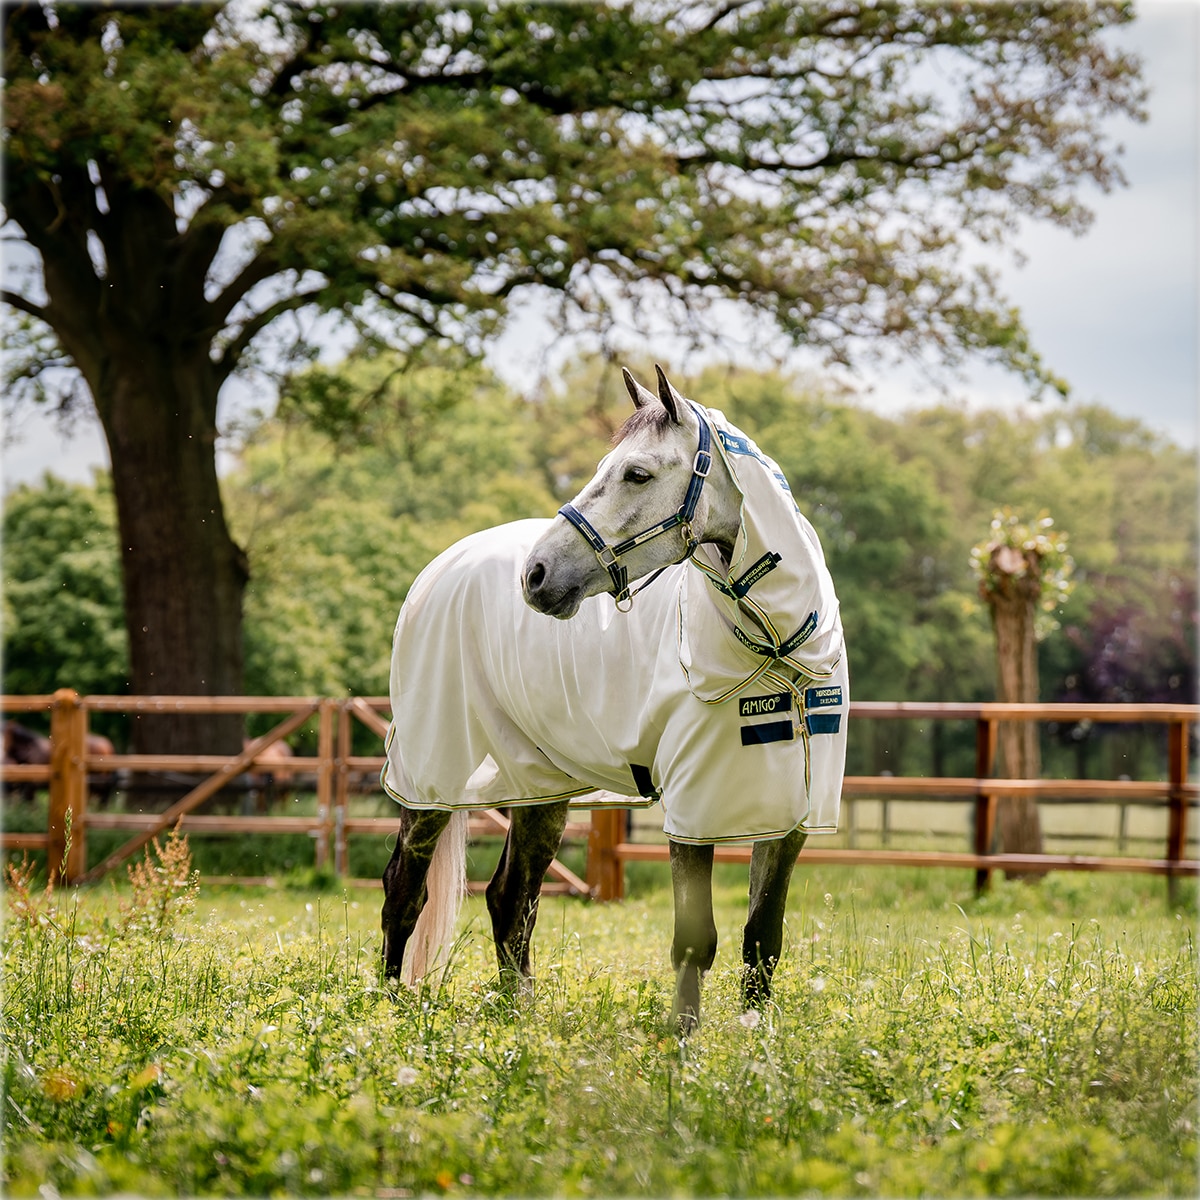 The Best Fly Protection for Horses - Countryside